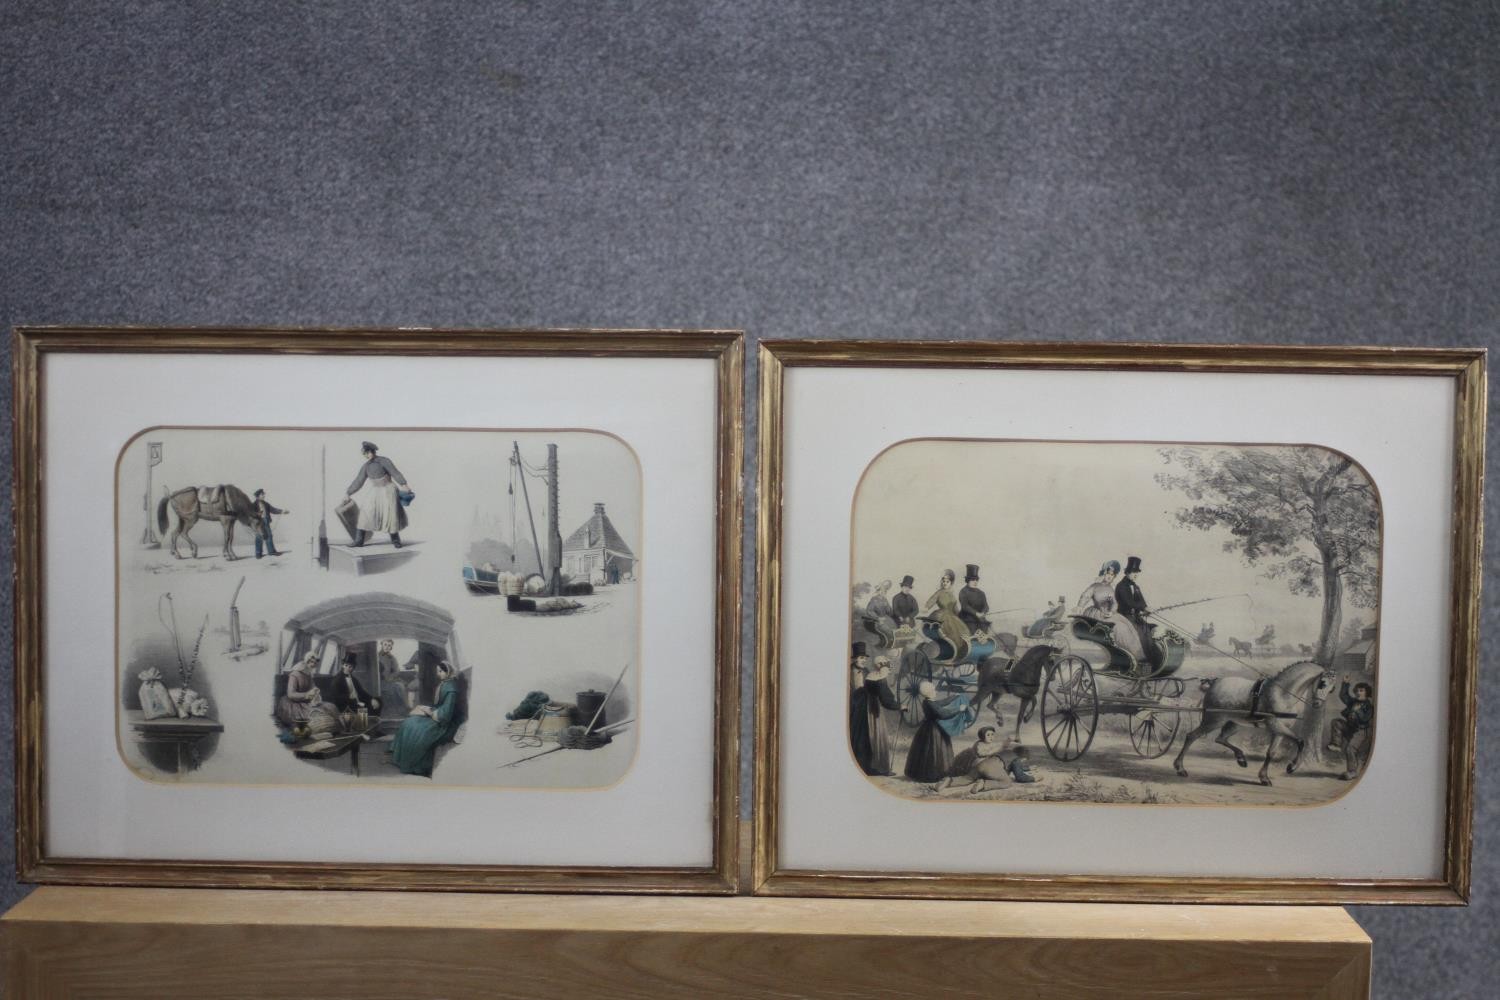 Ten framed and glazed 19th century hand coloured Dutch lithographs by R. De Vries. H.40 W.50 cm.